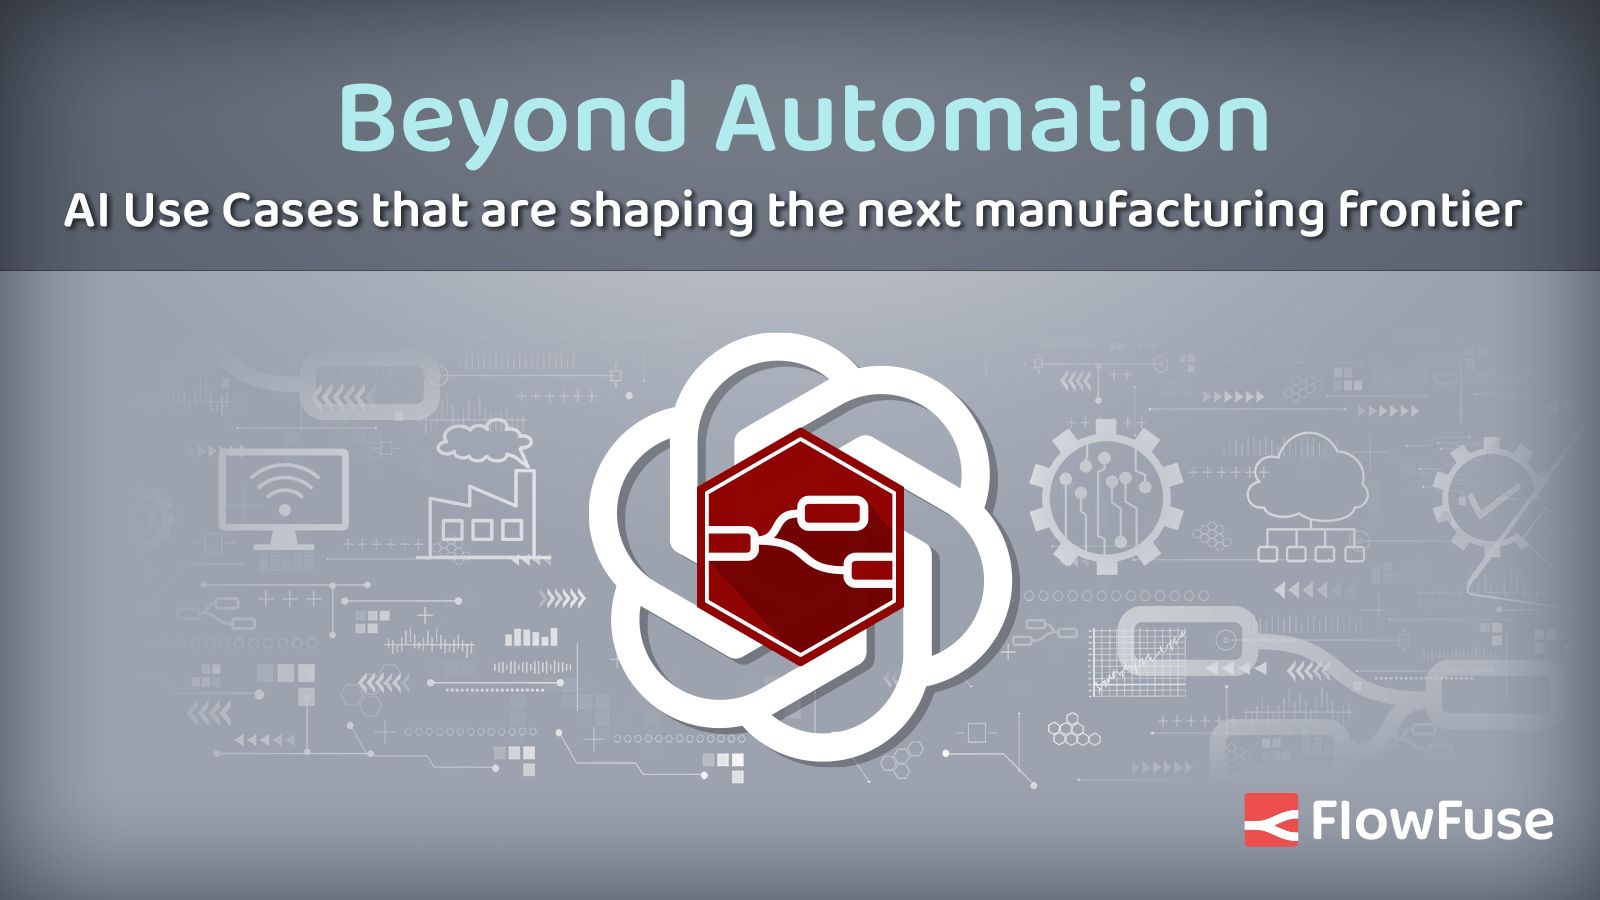 Image representing Beyond Automation - AI Use Cases that are shaping the next manufacturing frontier